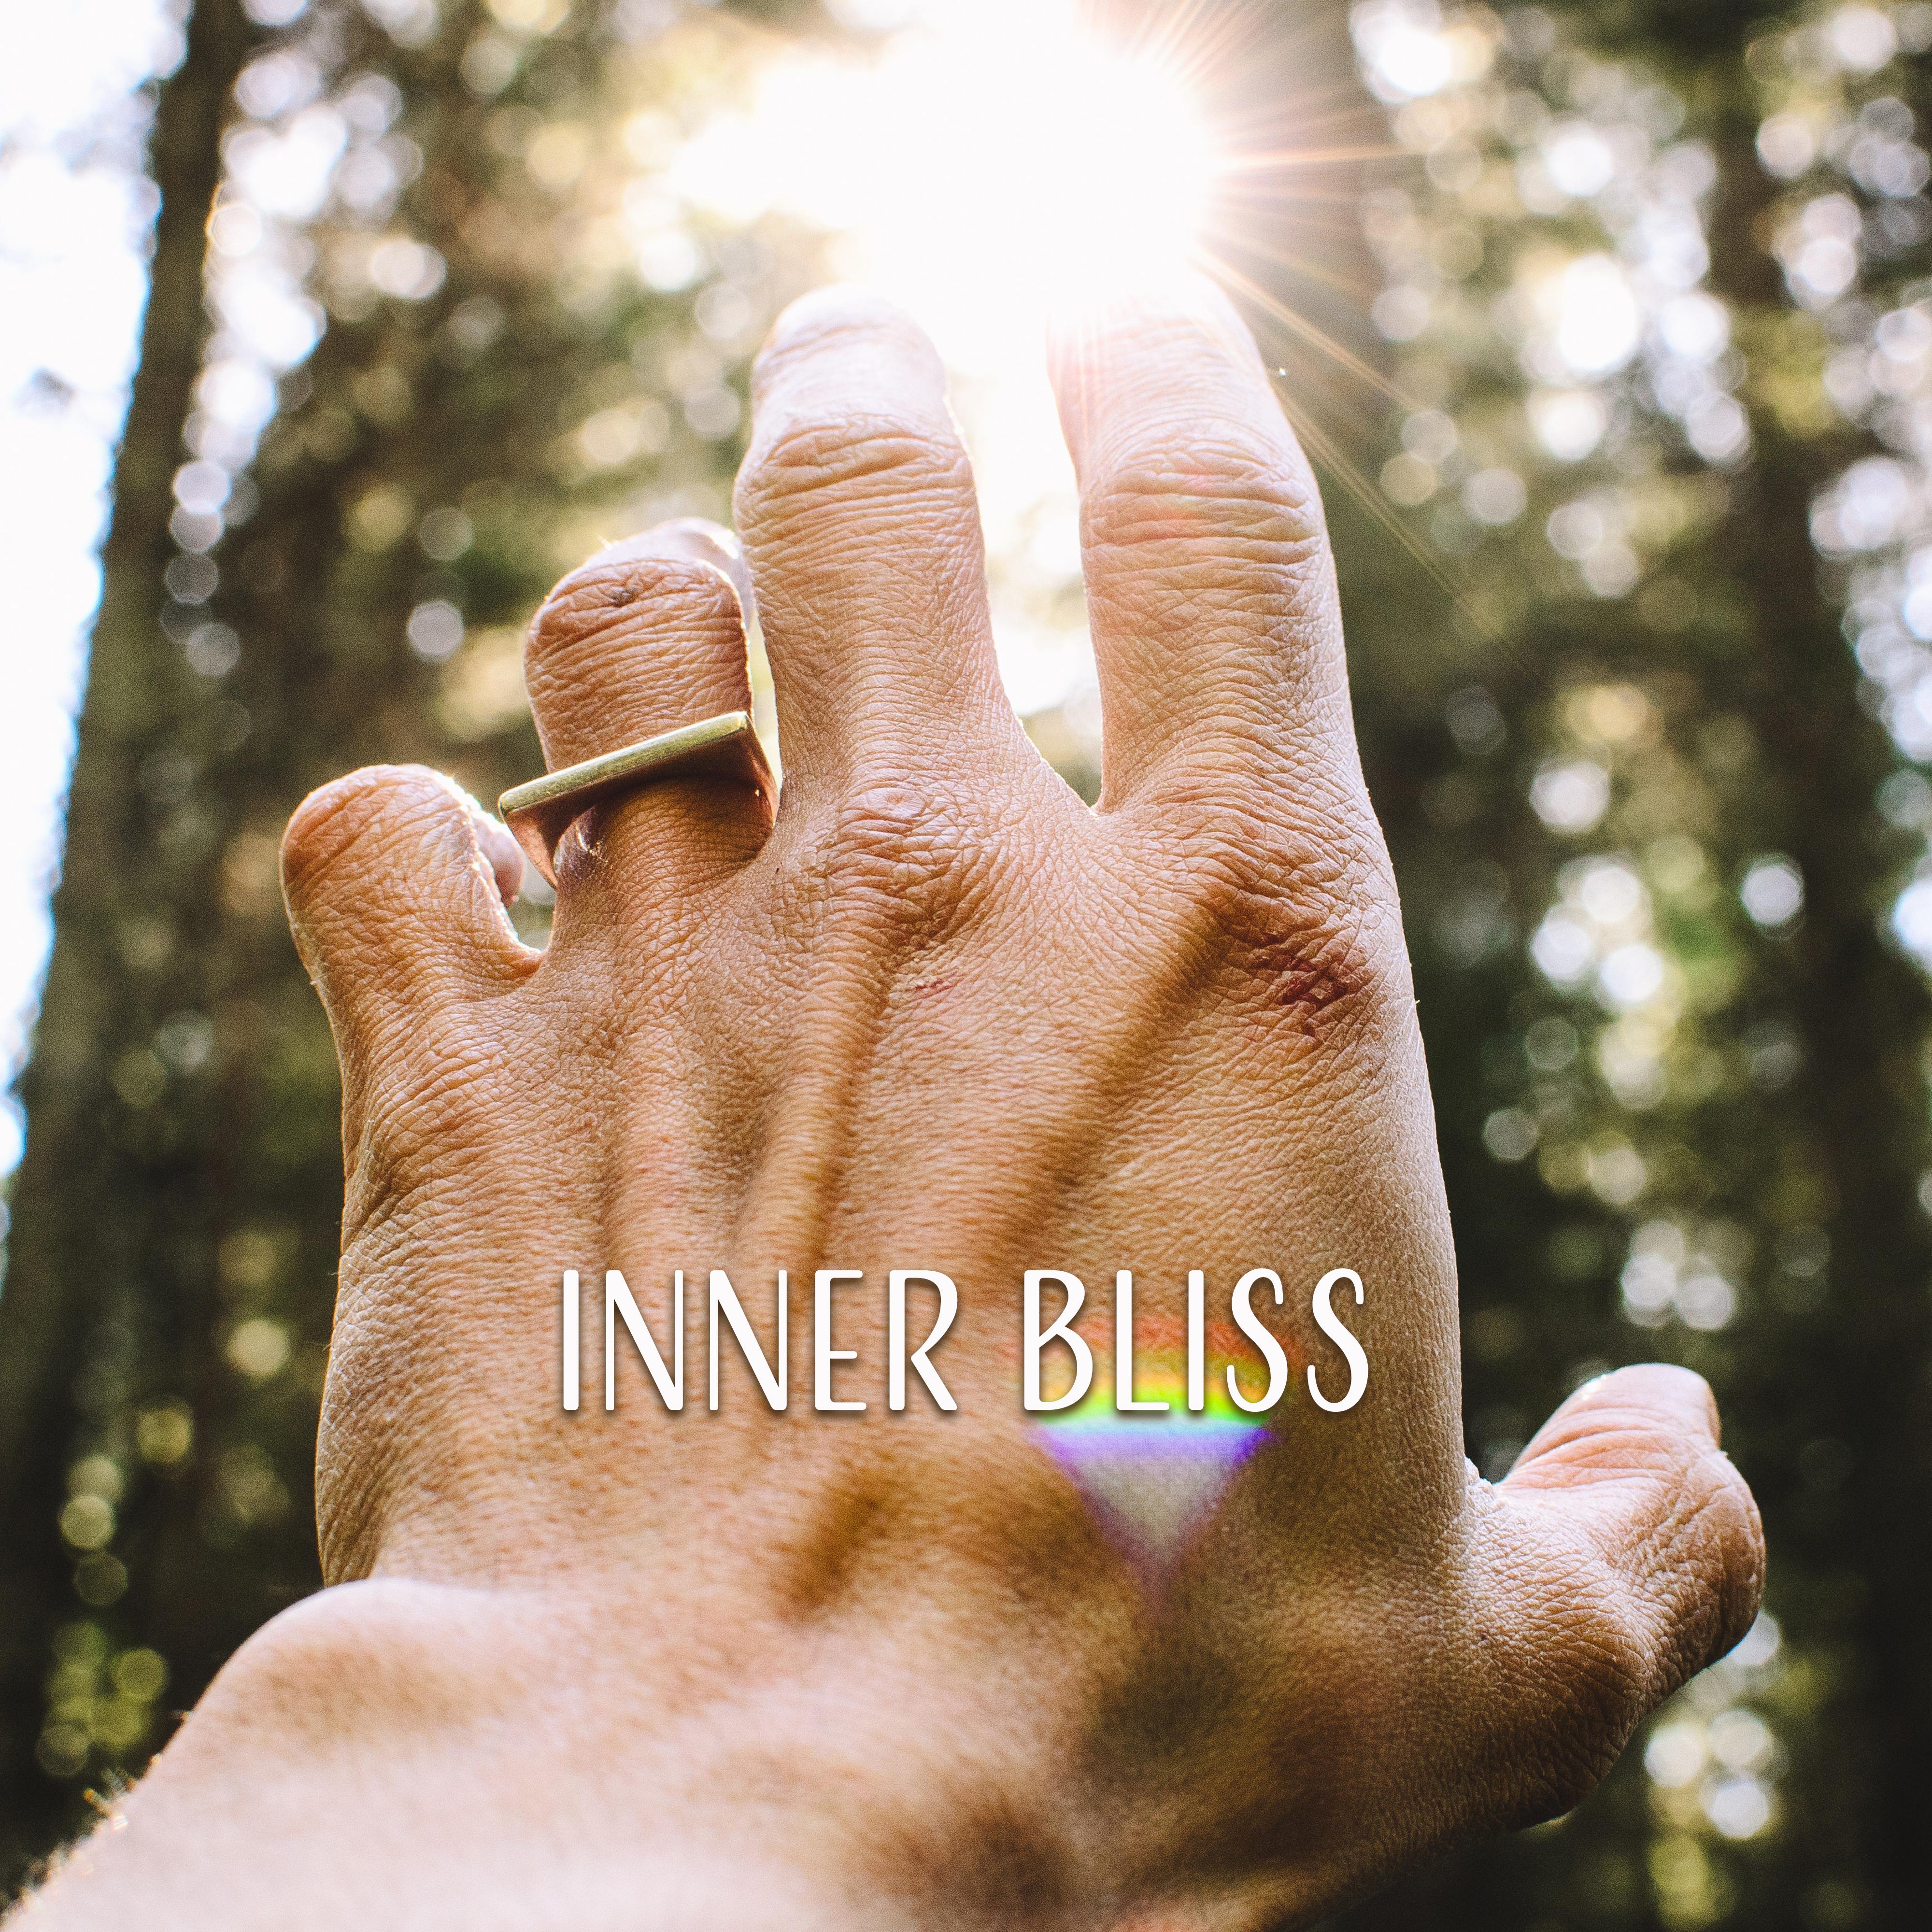 Inner Bliss  Water Sounds, Pure Relaxation, Healing Nature, Perfect Rest, Anti Stress Music